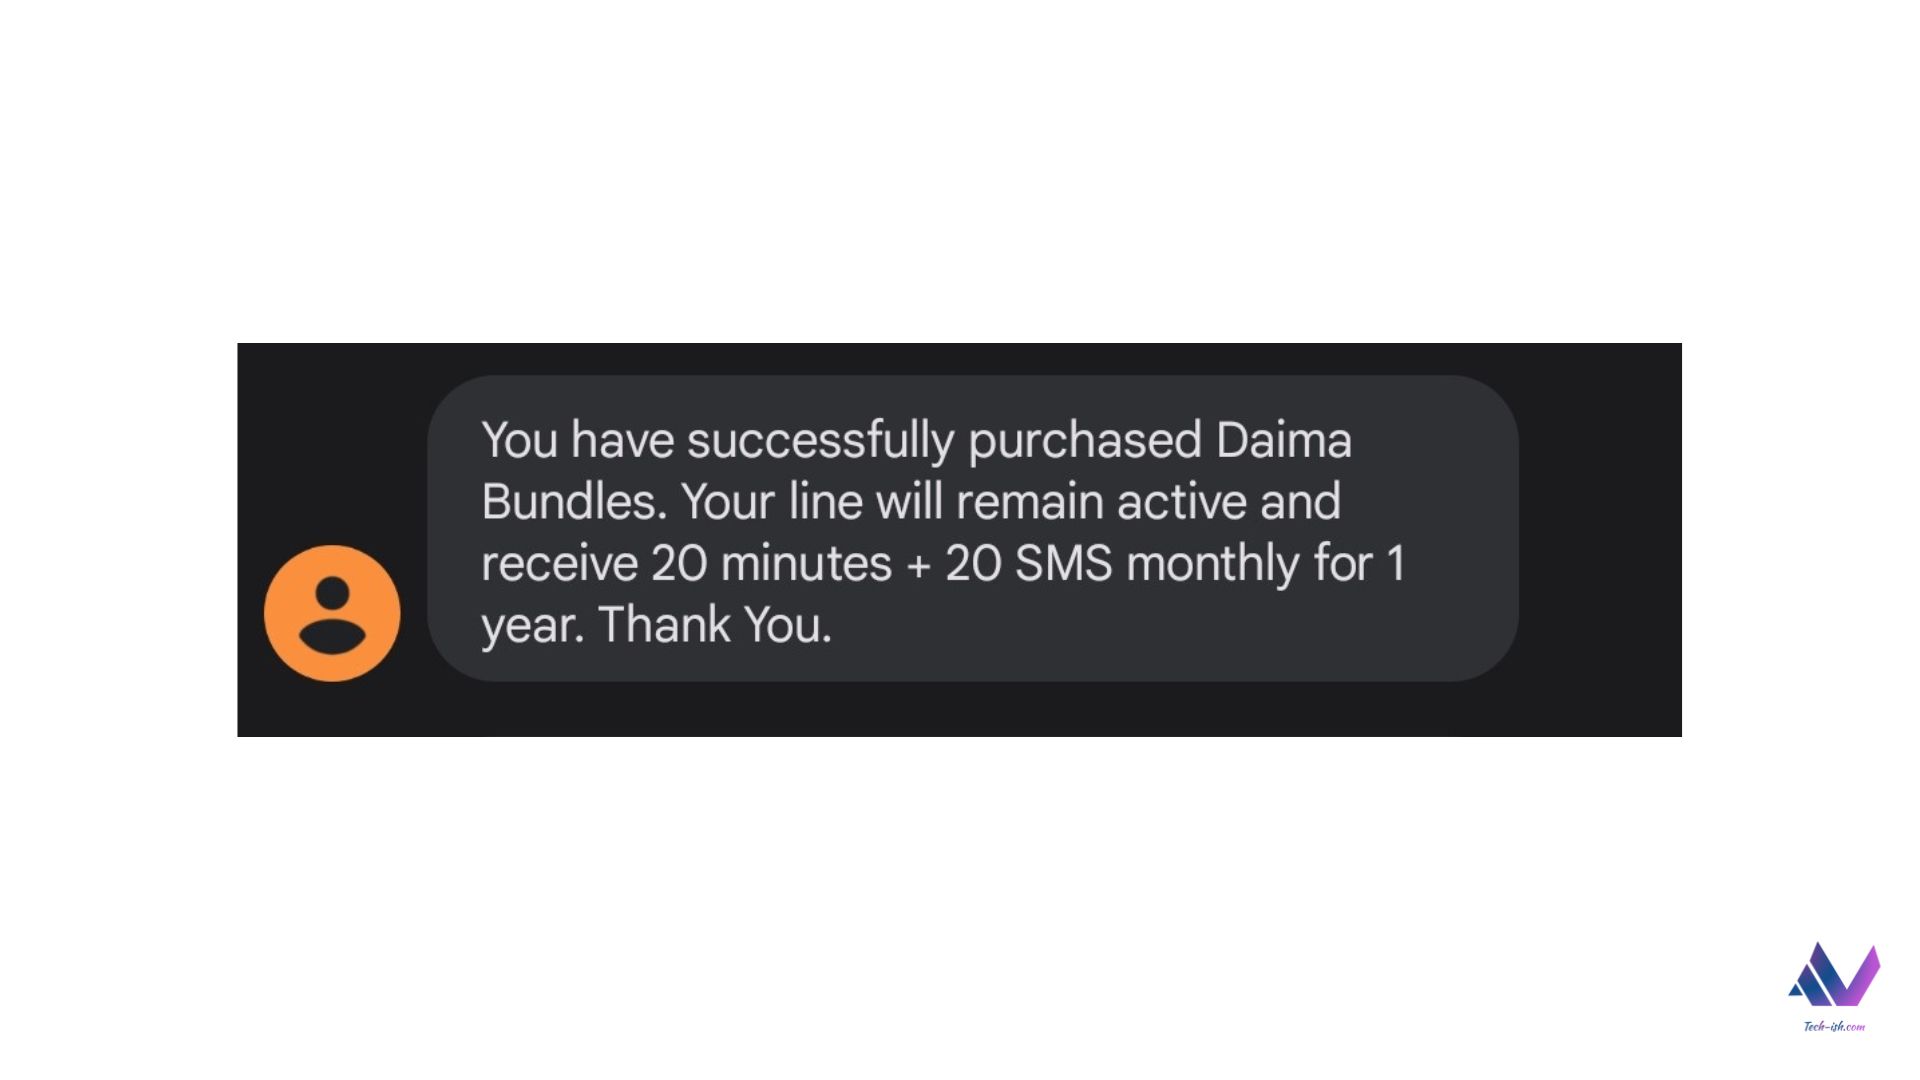 Safaricom Daima let's you keep your line active even when you're not using it